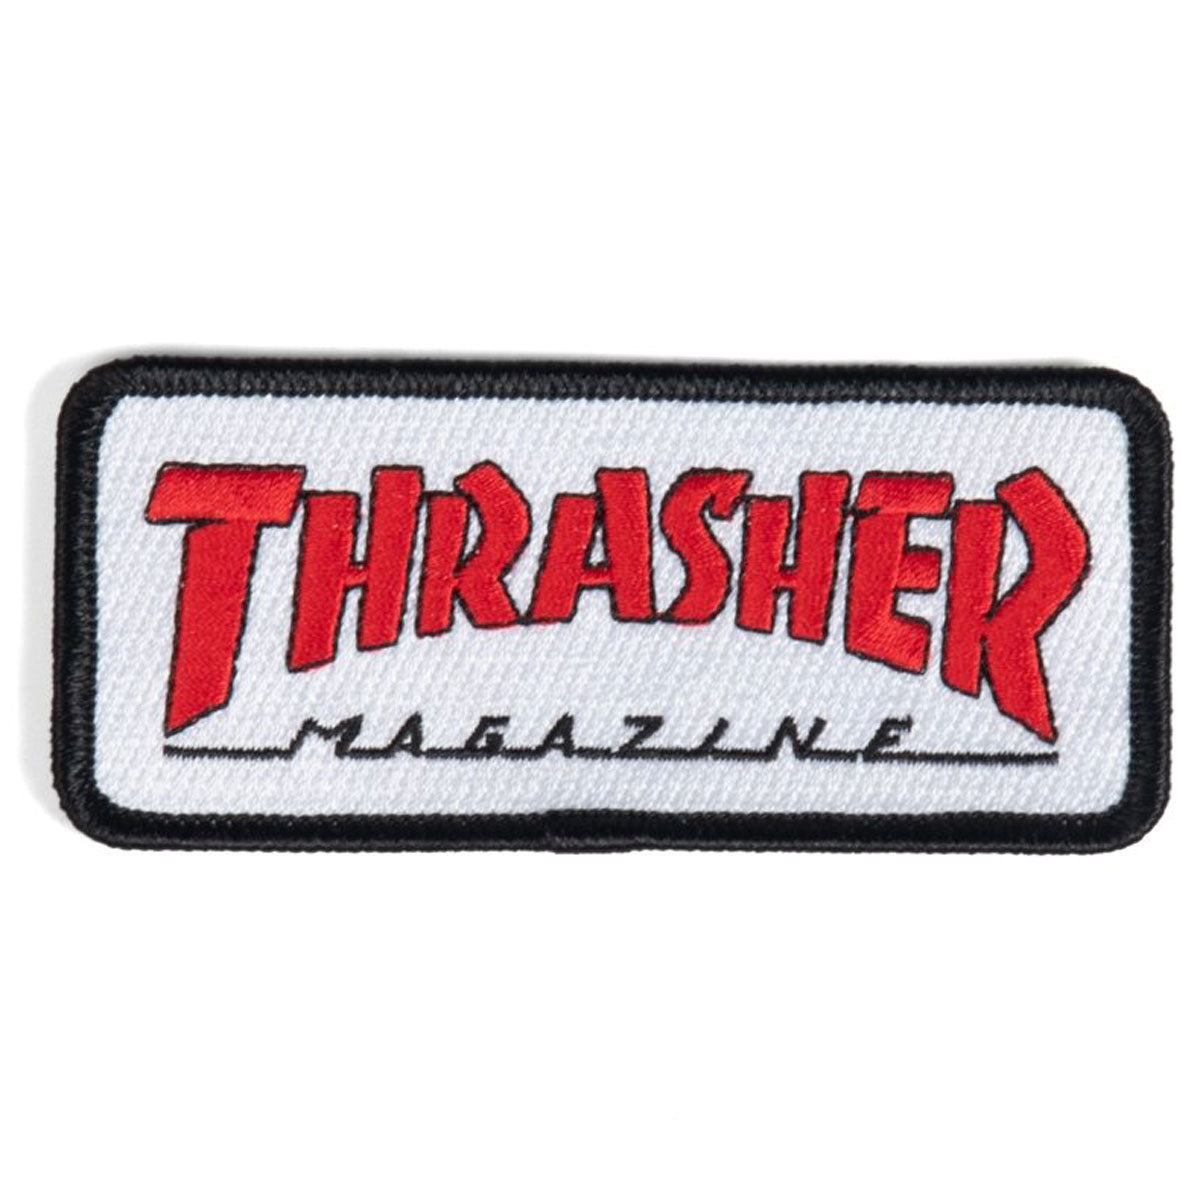 Thrasher Outlined Patch image 1